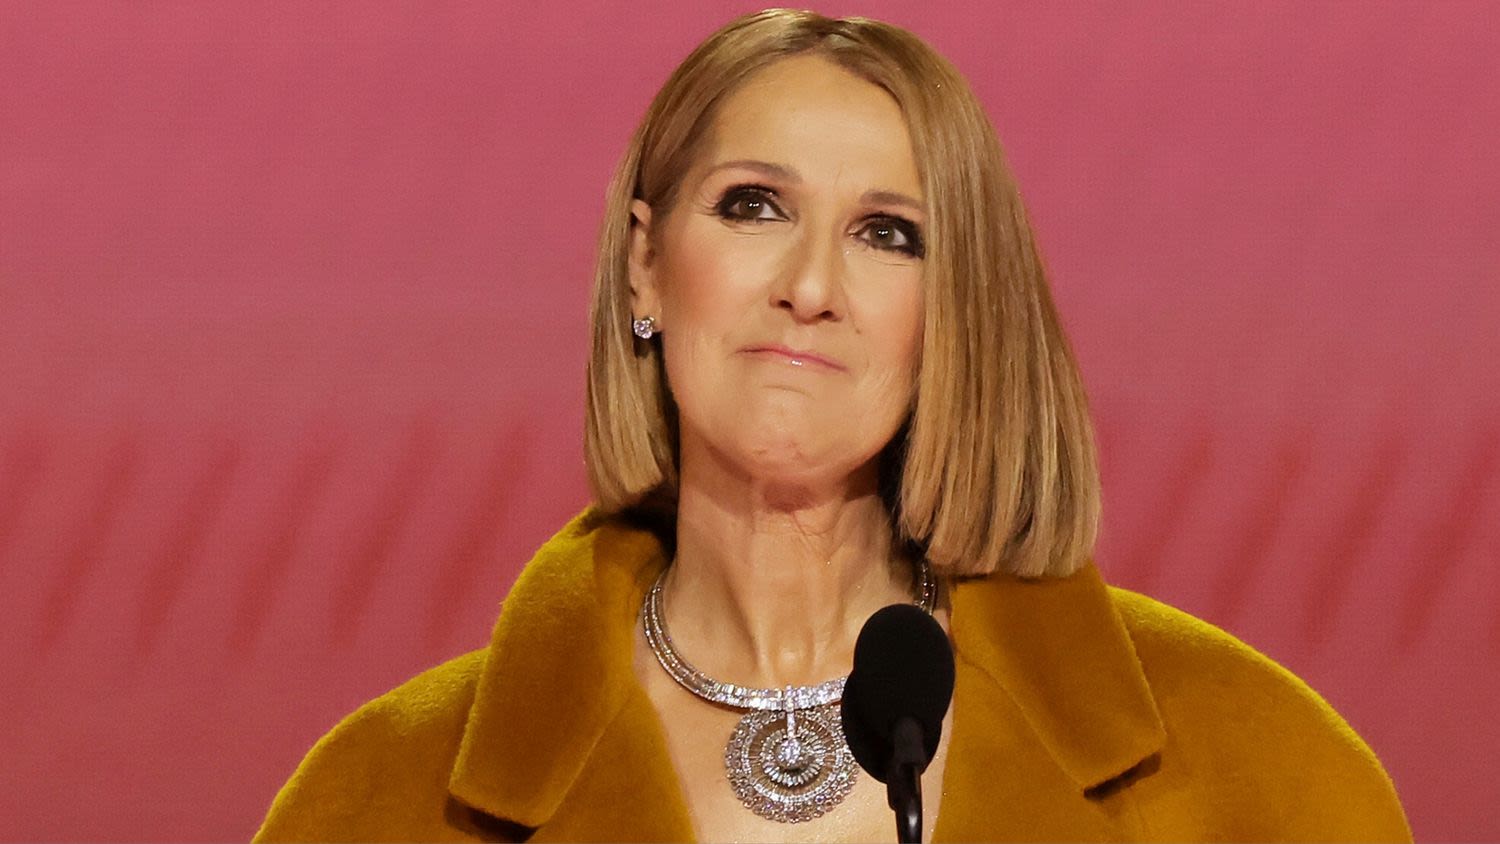 Celine Dion Revealed She "Almost Died" Amid Her Battle With Stiff-Person Syndrome